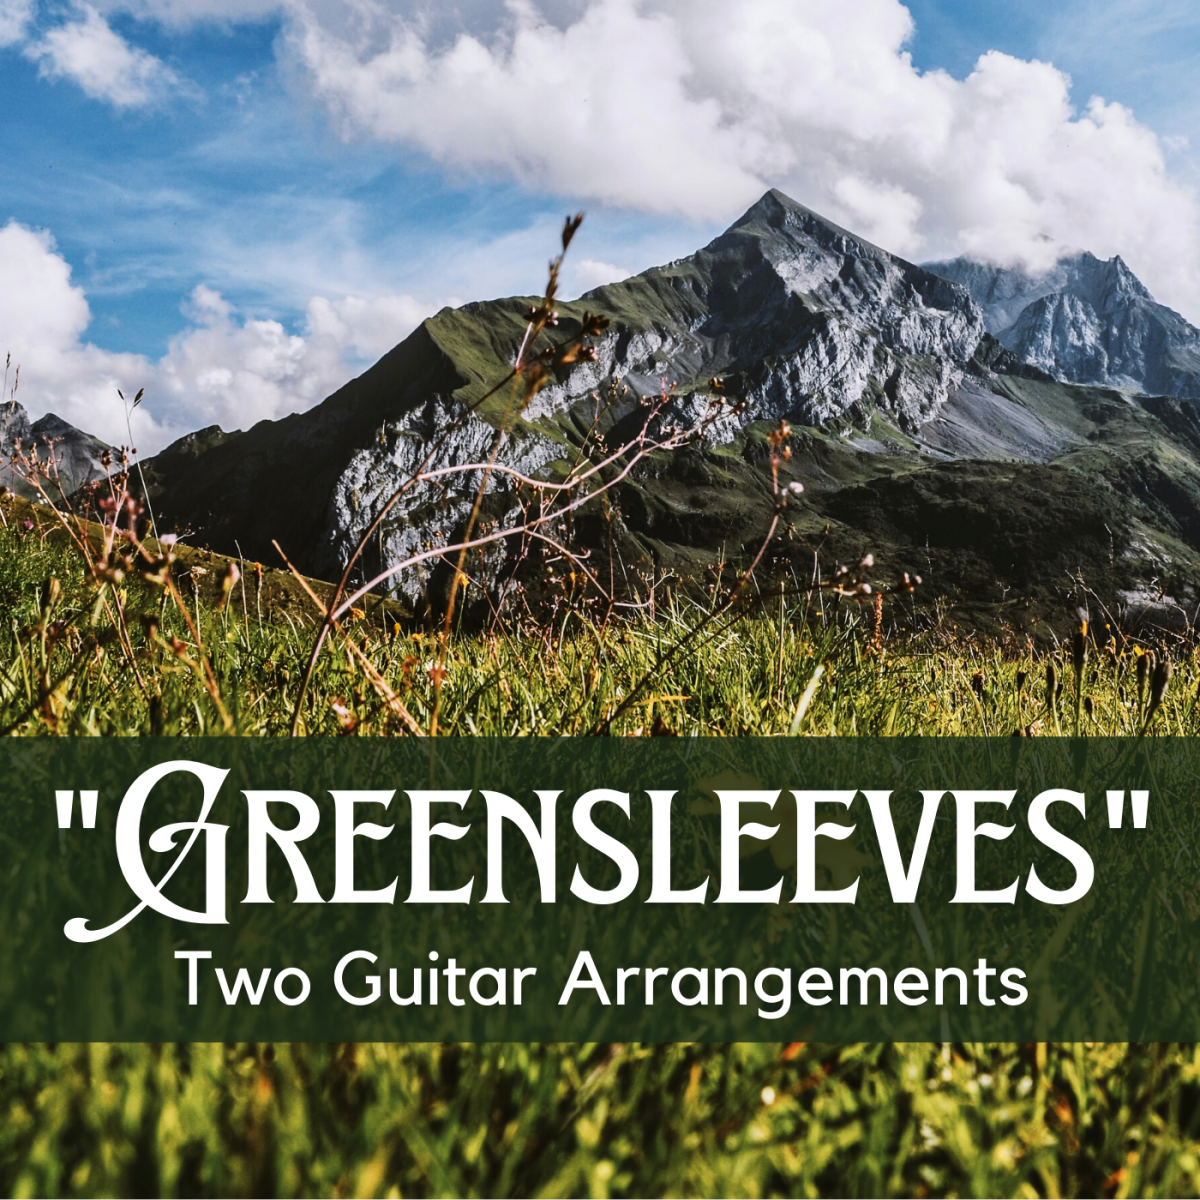 Learn to play "Greensleeves" on guitar.